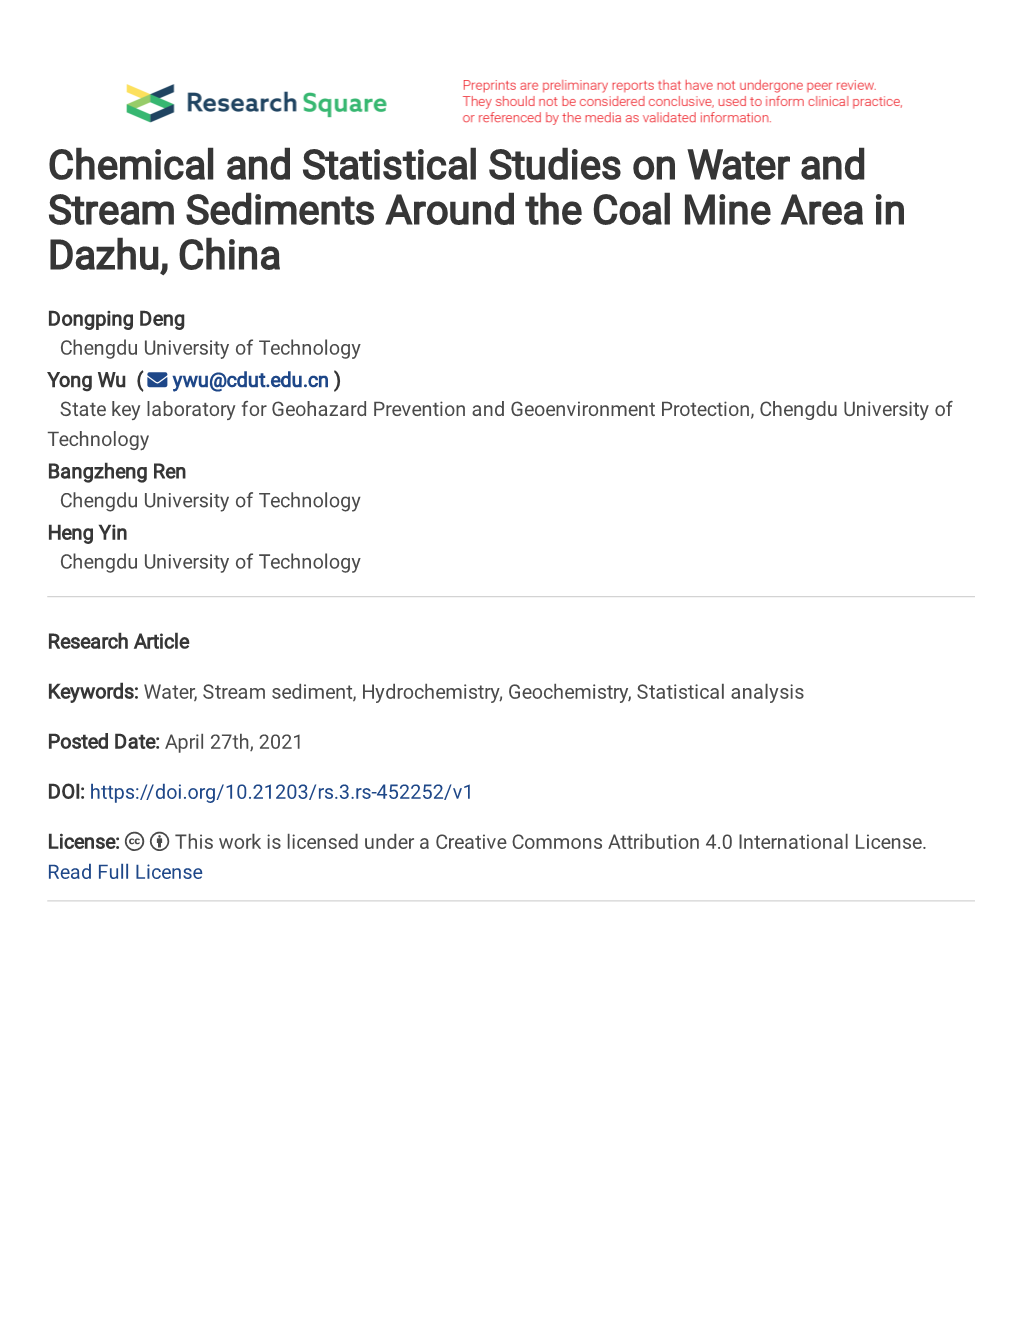 Chemical and Statistical Studies on Water and Stream Sediments Around the Coal Mine Area in Dazhu, China